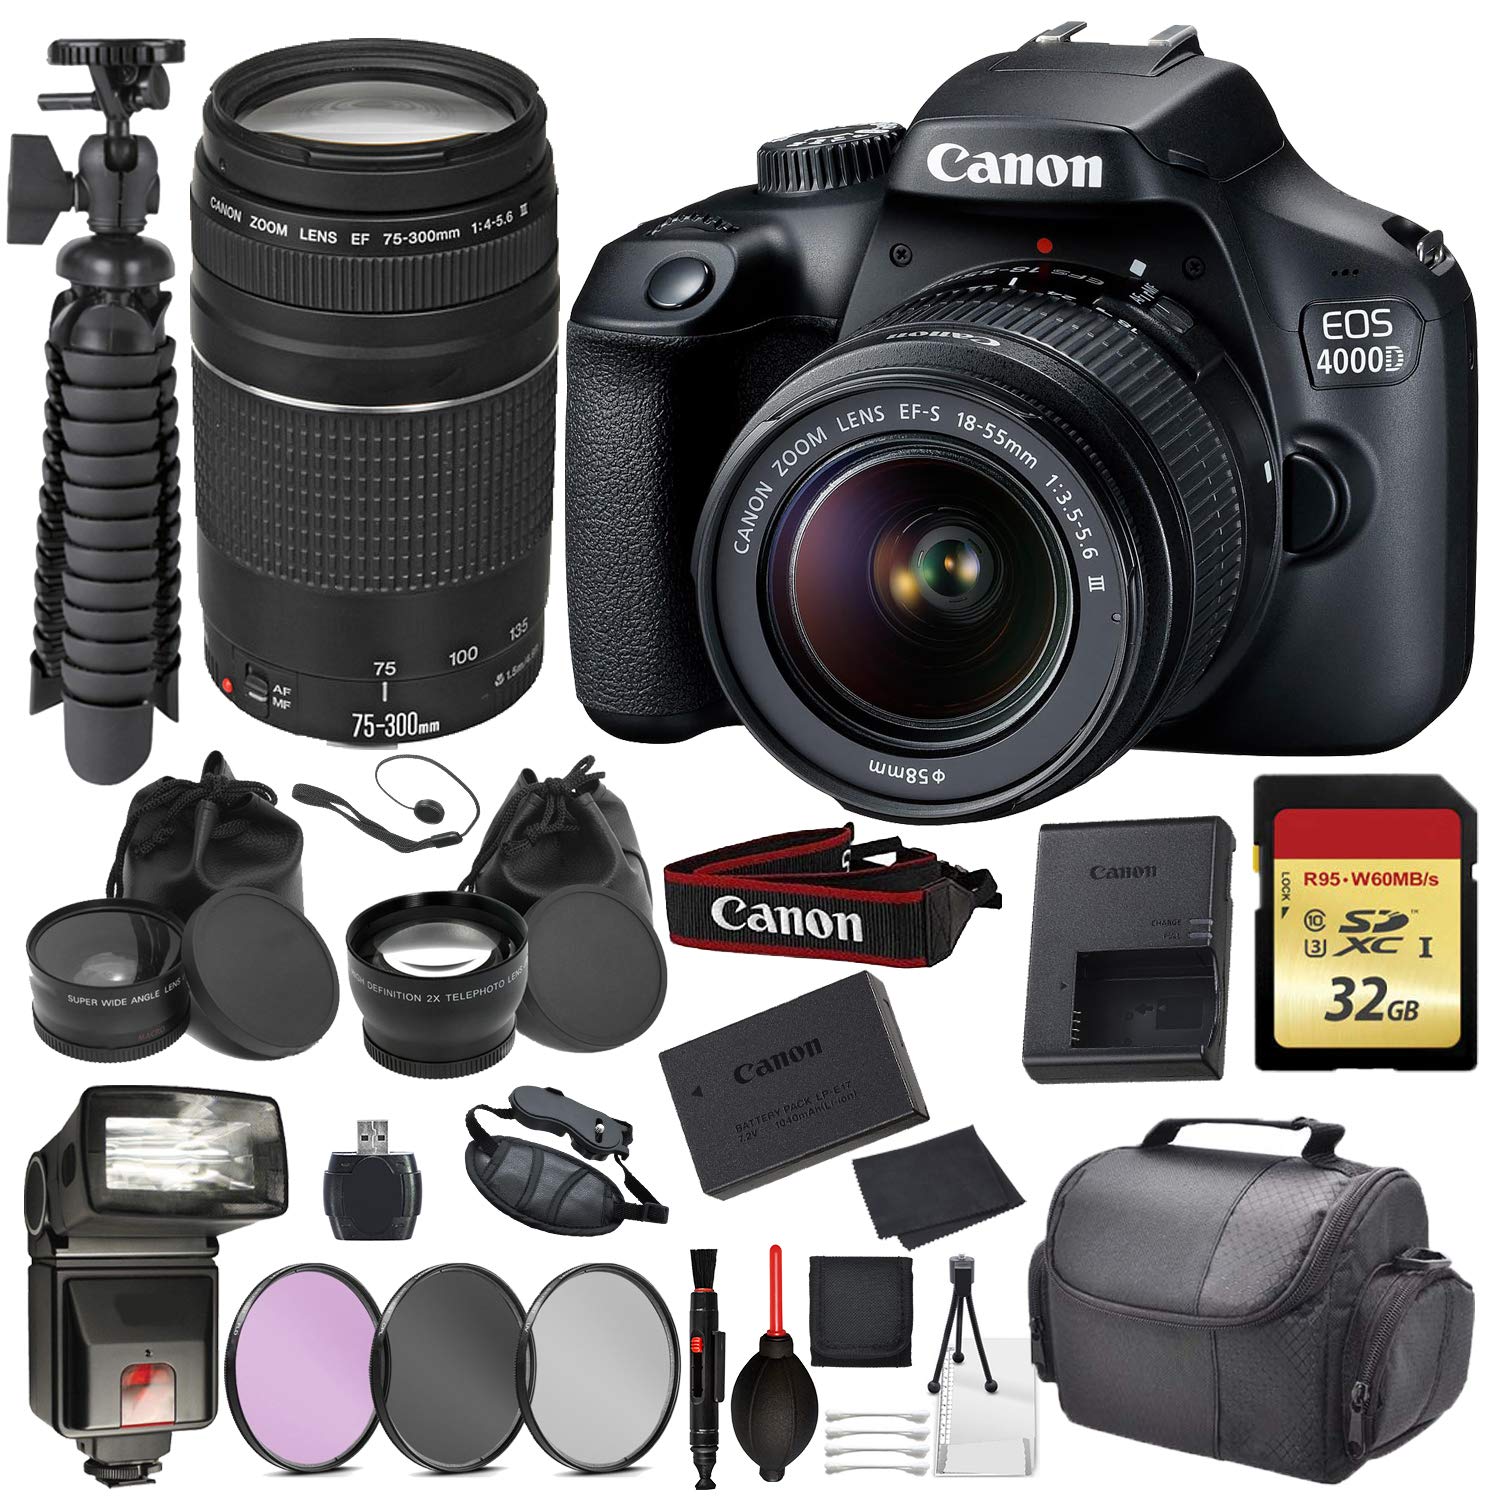 Canon EOS Rebel 4000D Digital SLR Camera with EF-S 18-55mm + EF 75-300mm (Black) Accessory Bundle Package Deal : 32gb SD